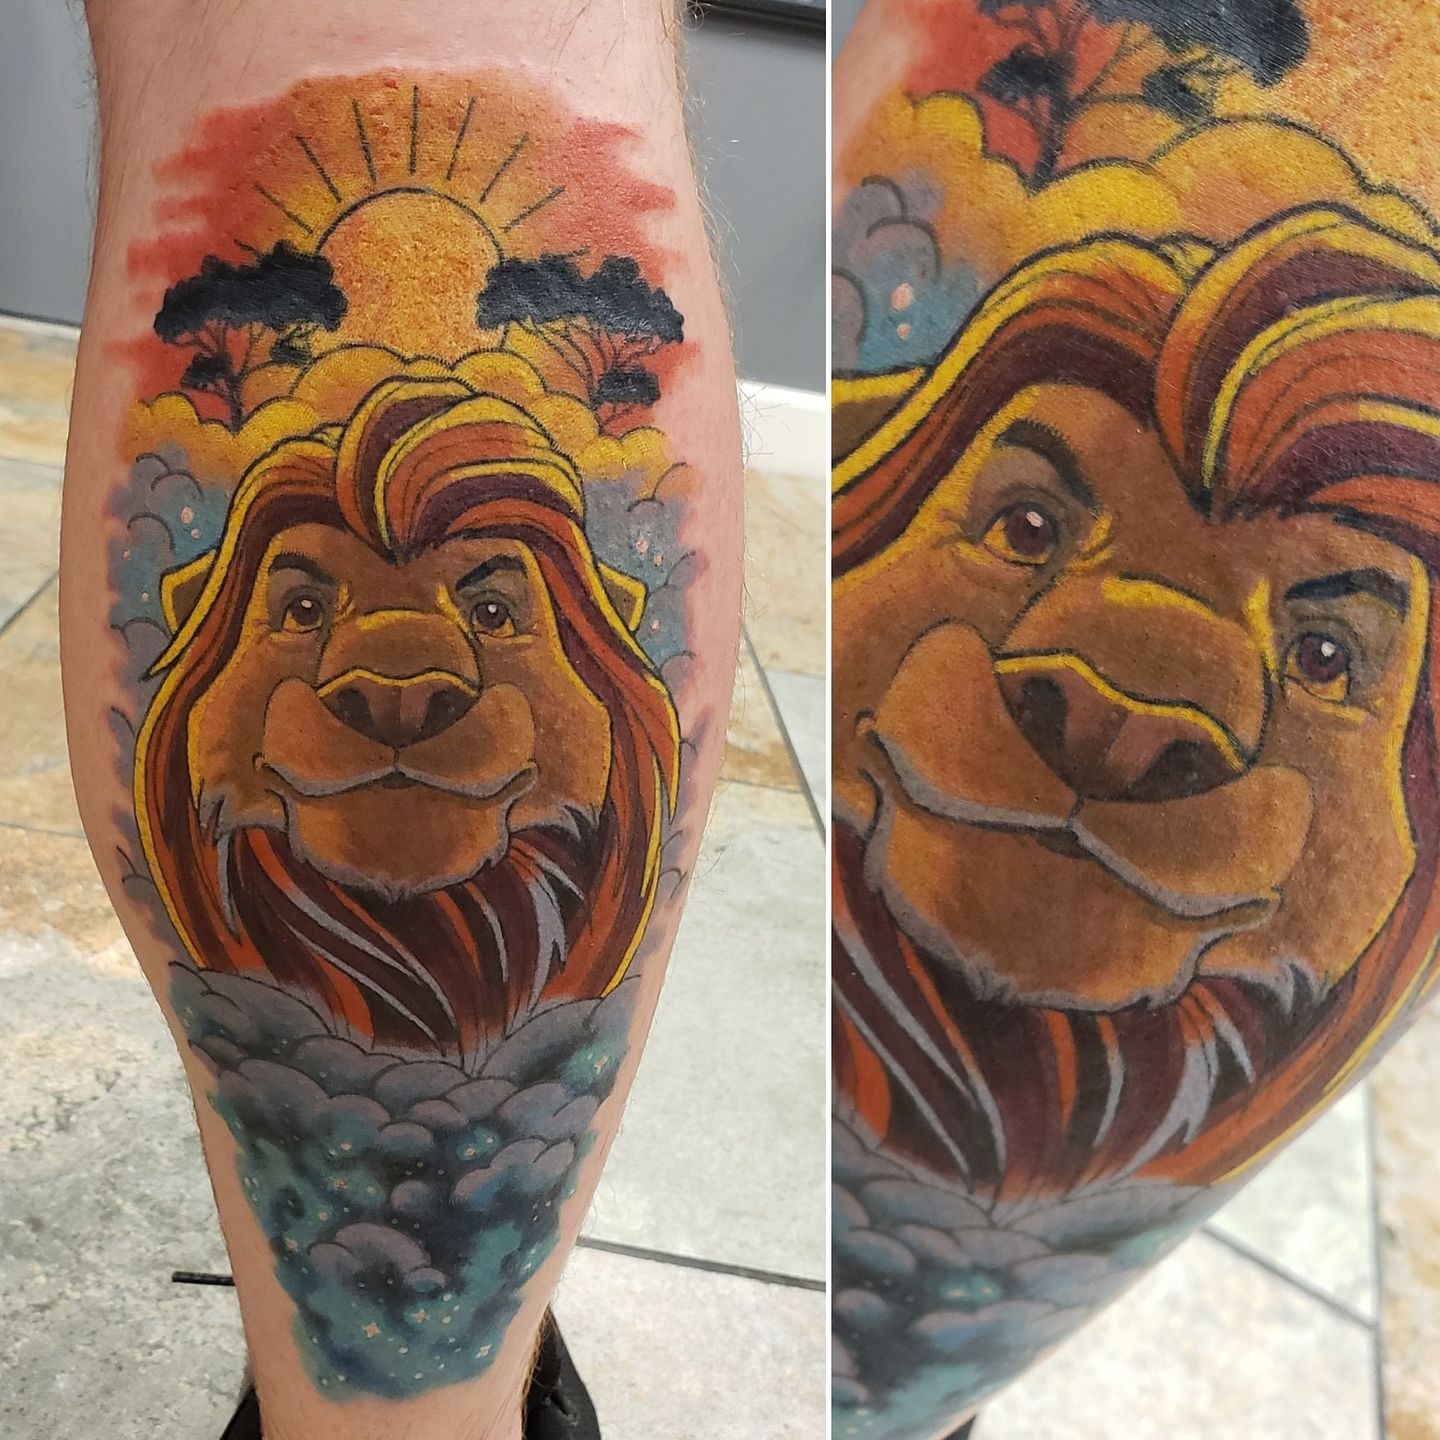 Hand poked Simba tattoo close to the left ankle.